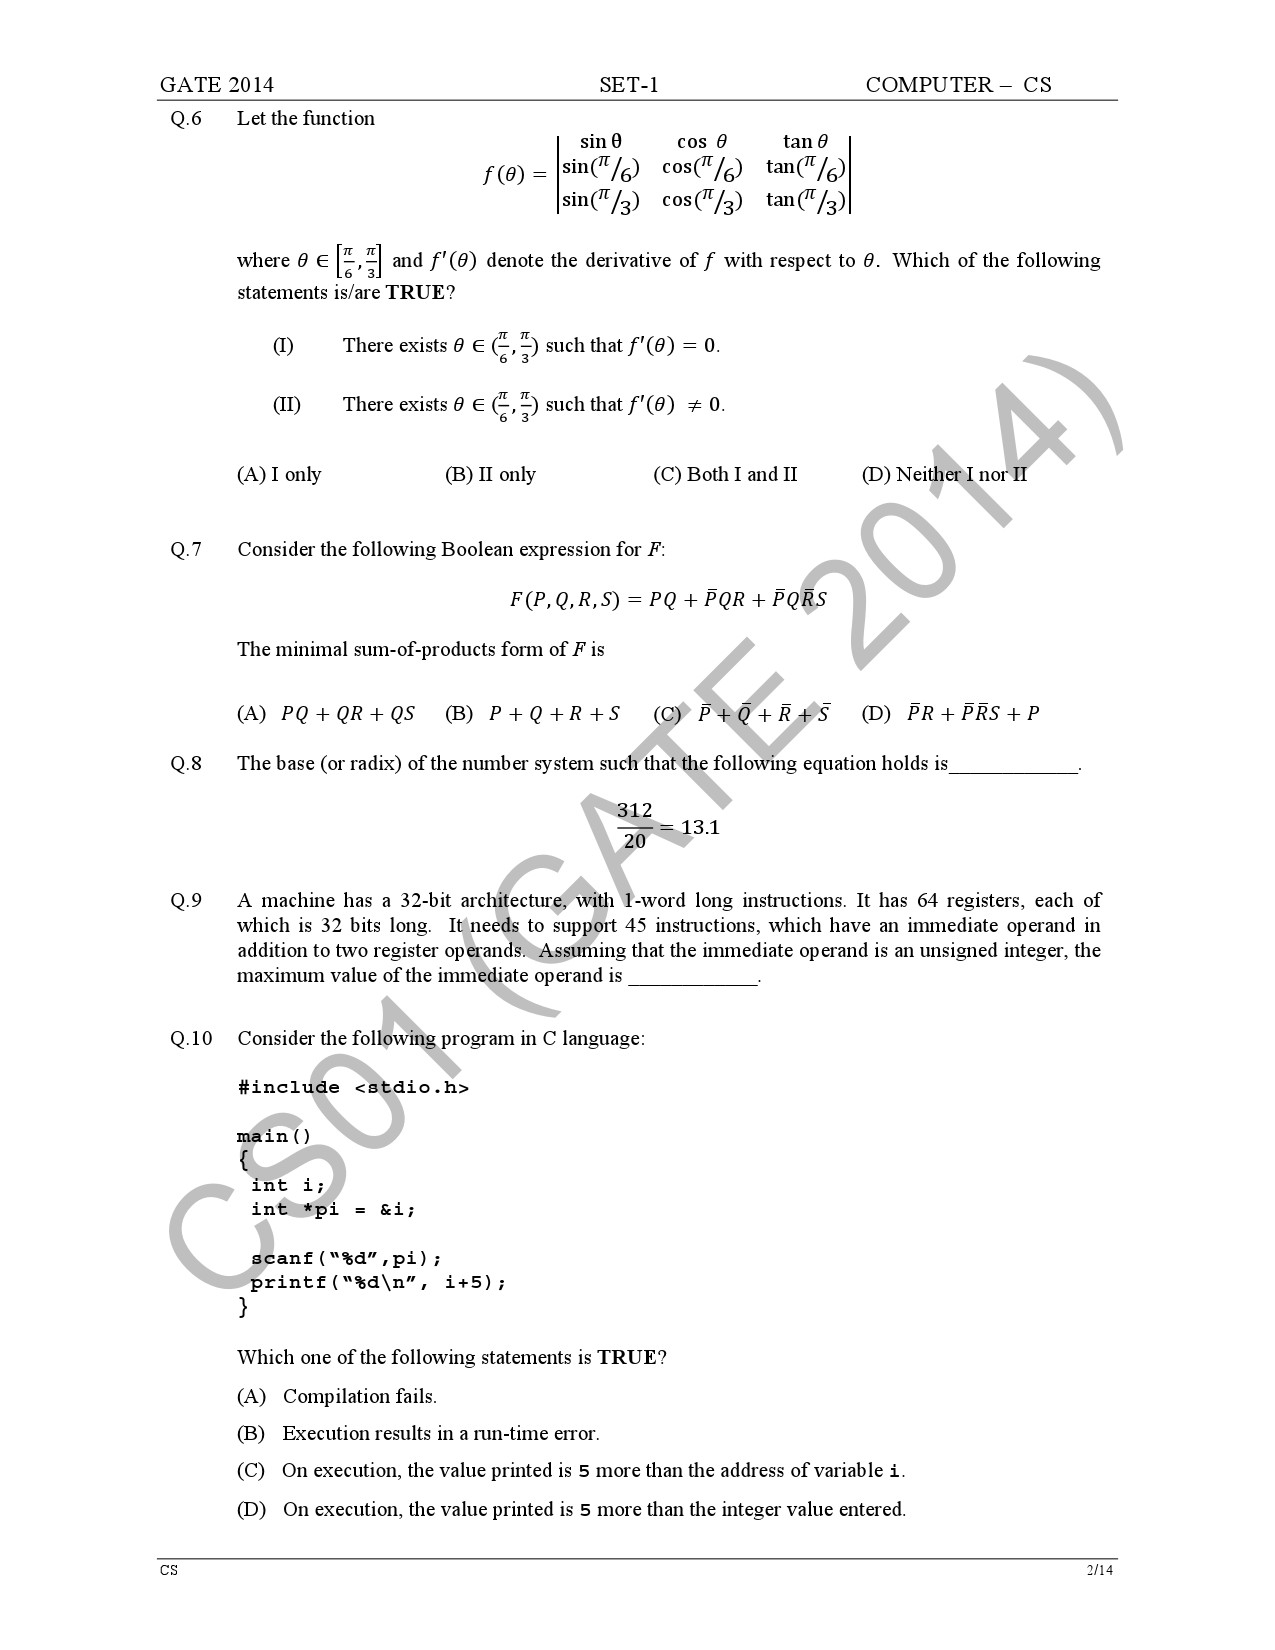 GATE Exam Question Paper 2014 Computer Science and Information Technology Set 1 8